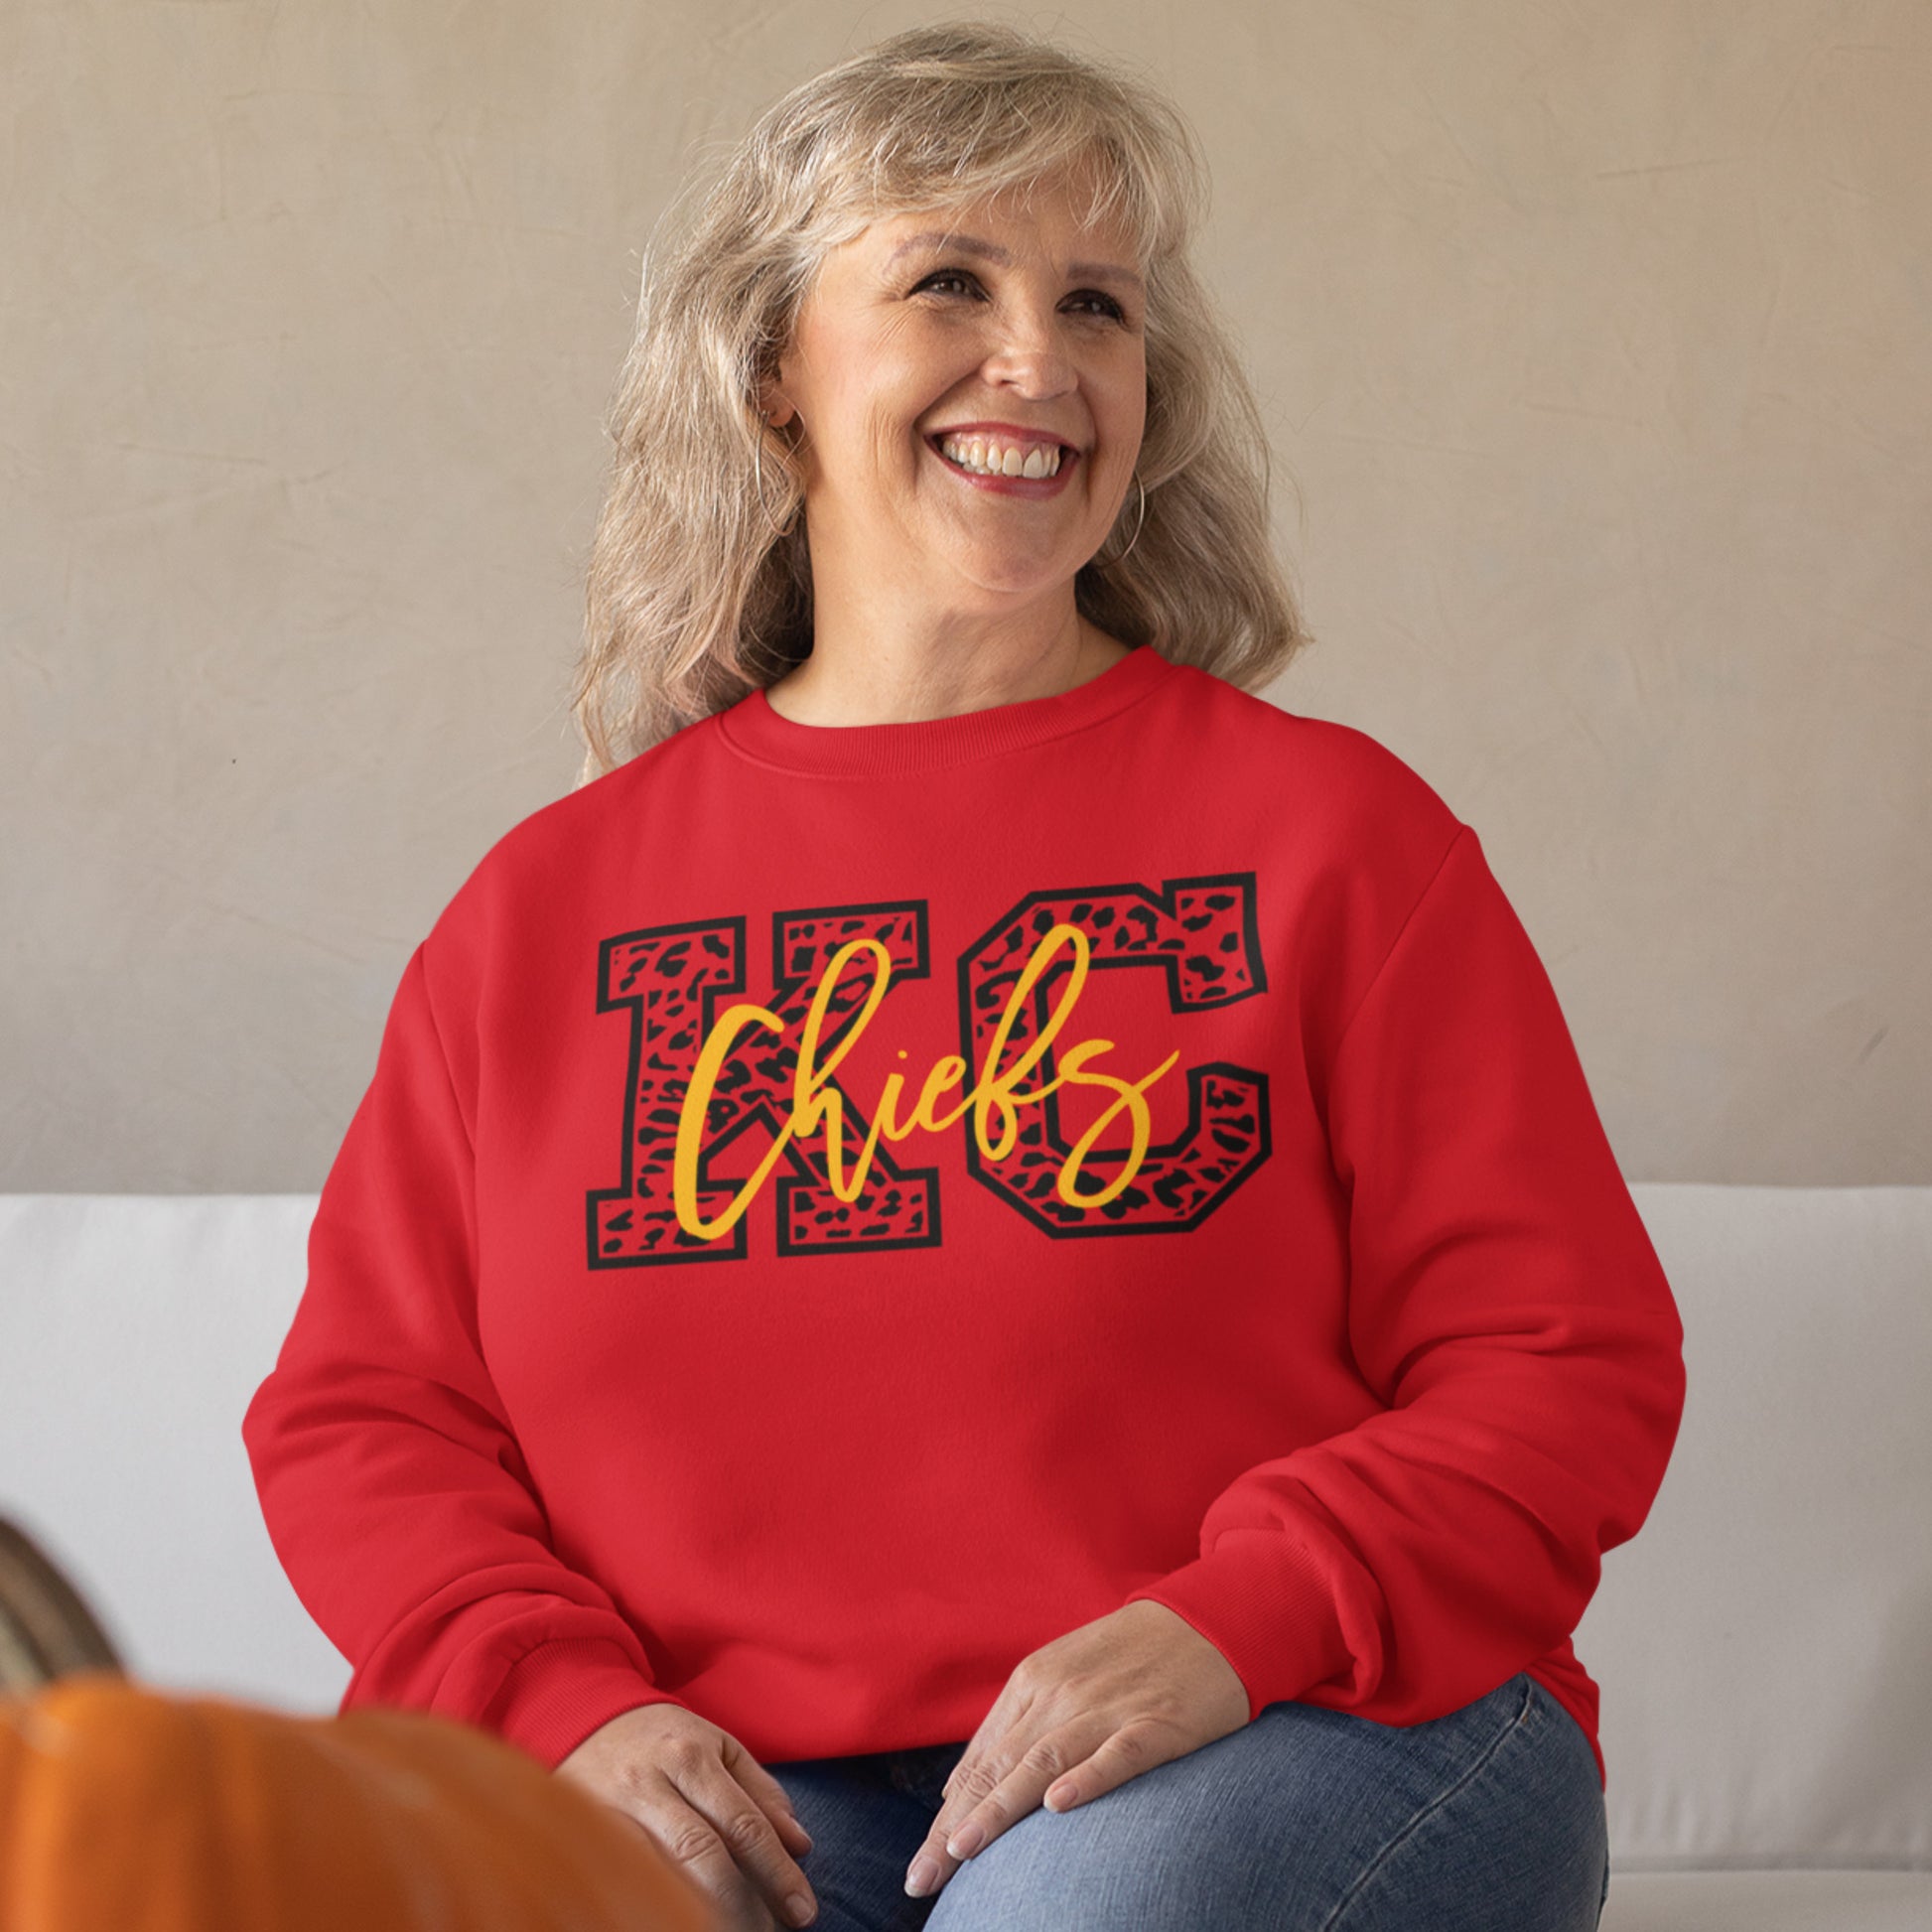 KC Swag Kansas City Chiefs Black & Gold Cheetah KC on a Red Crewneck Sweatshirt worn by an older female model sitting on a white couch in front of a beige wall